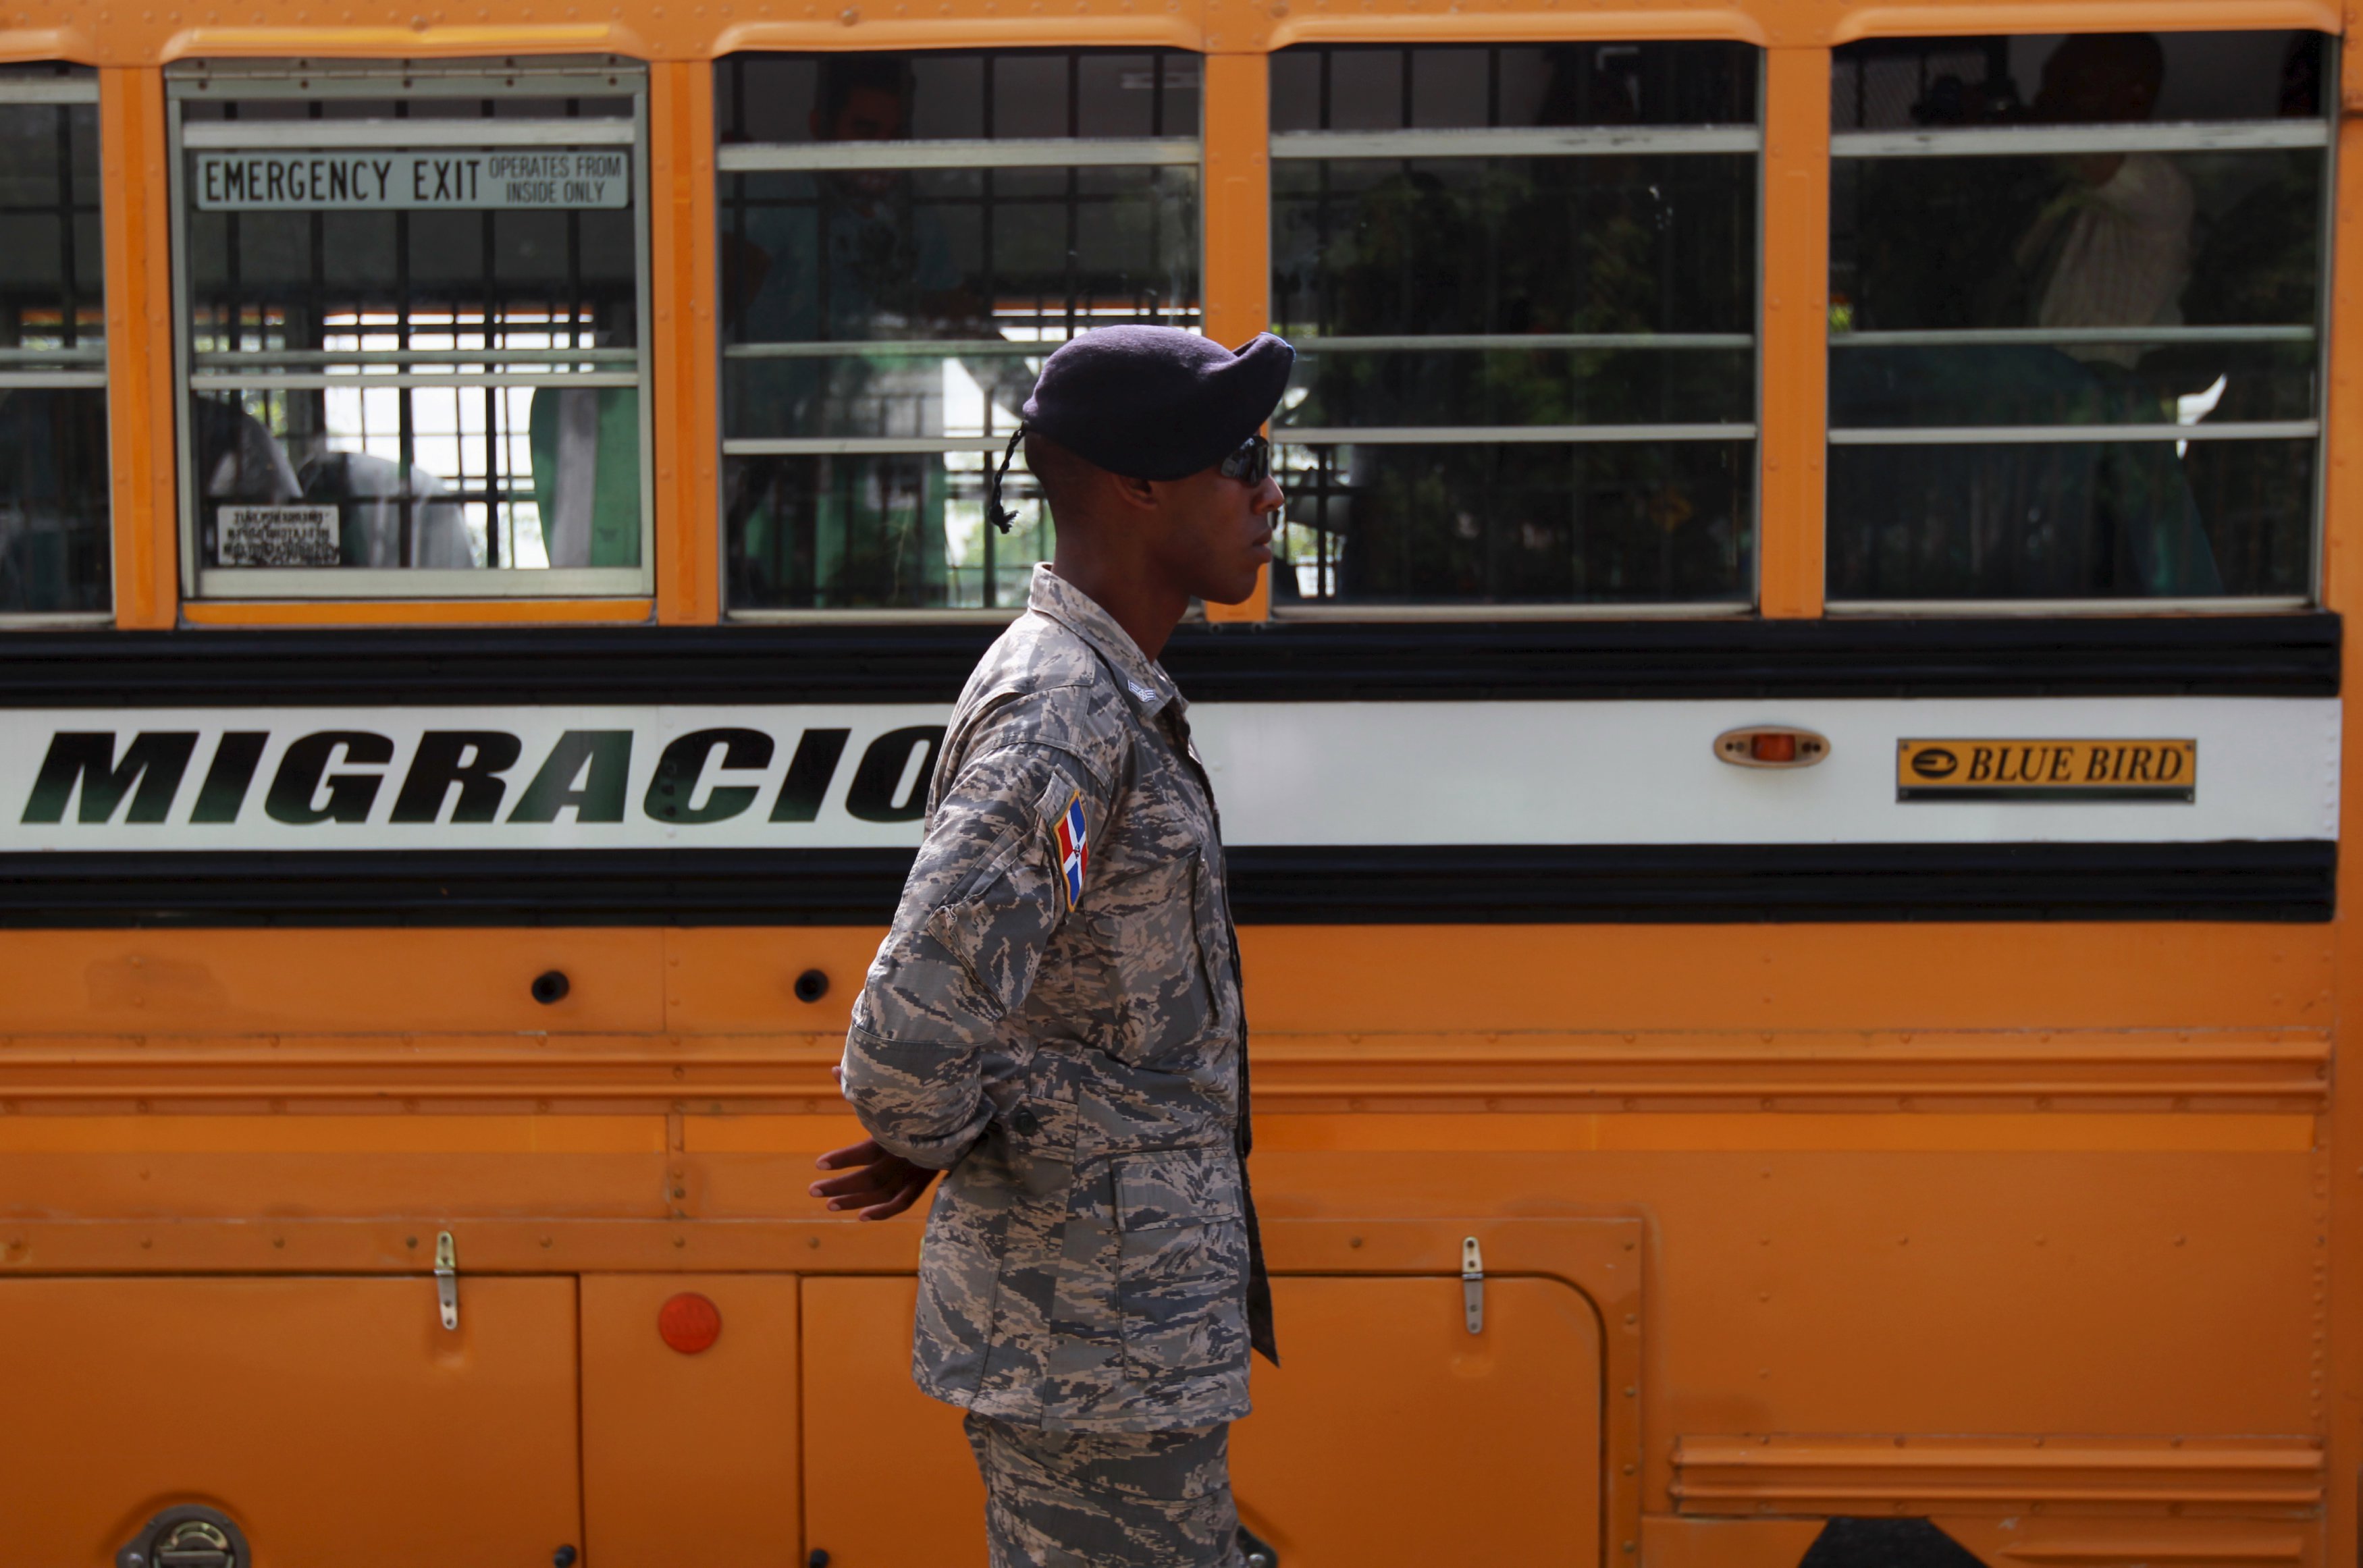 A Dominican soldier guards one of the buses of the National Migration Office in Santo Domingo June 24, 2015.